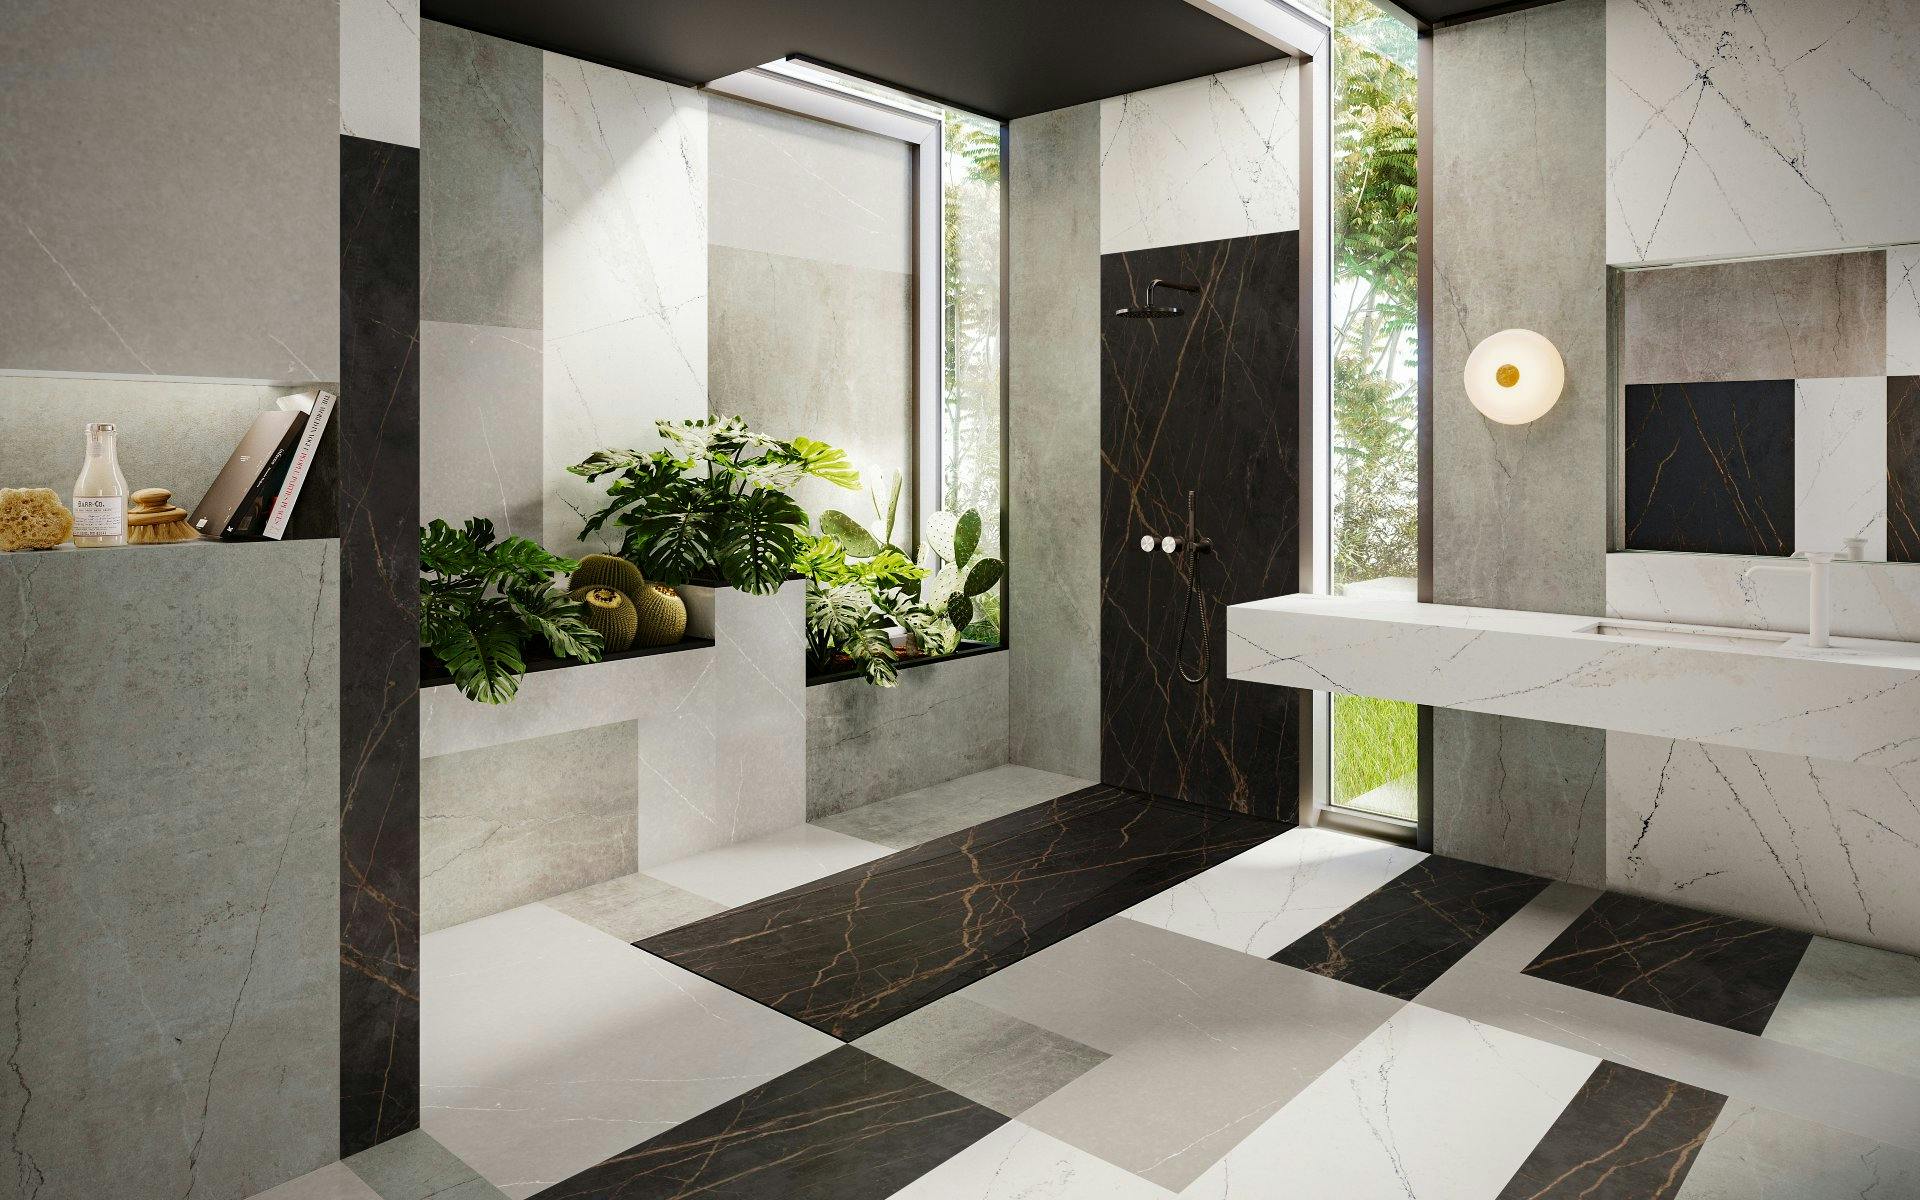 Numéro d'image 46 de la section actuelle de Cosentino partners with two designers in Malaysia to showcase the versatility of DKTN Pietra Kode and its use beyond the kitchen de Cosentino France